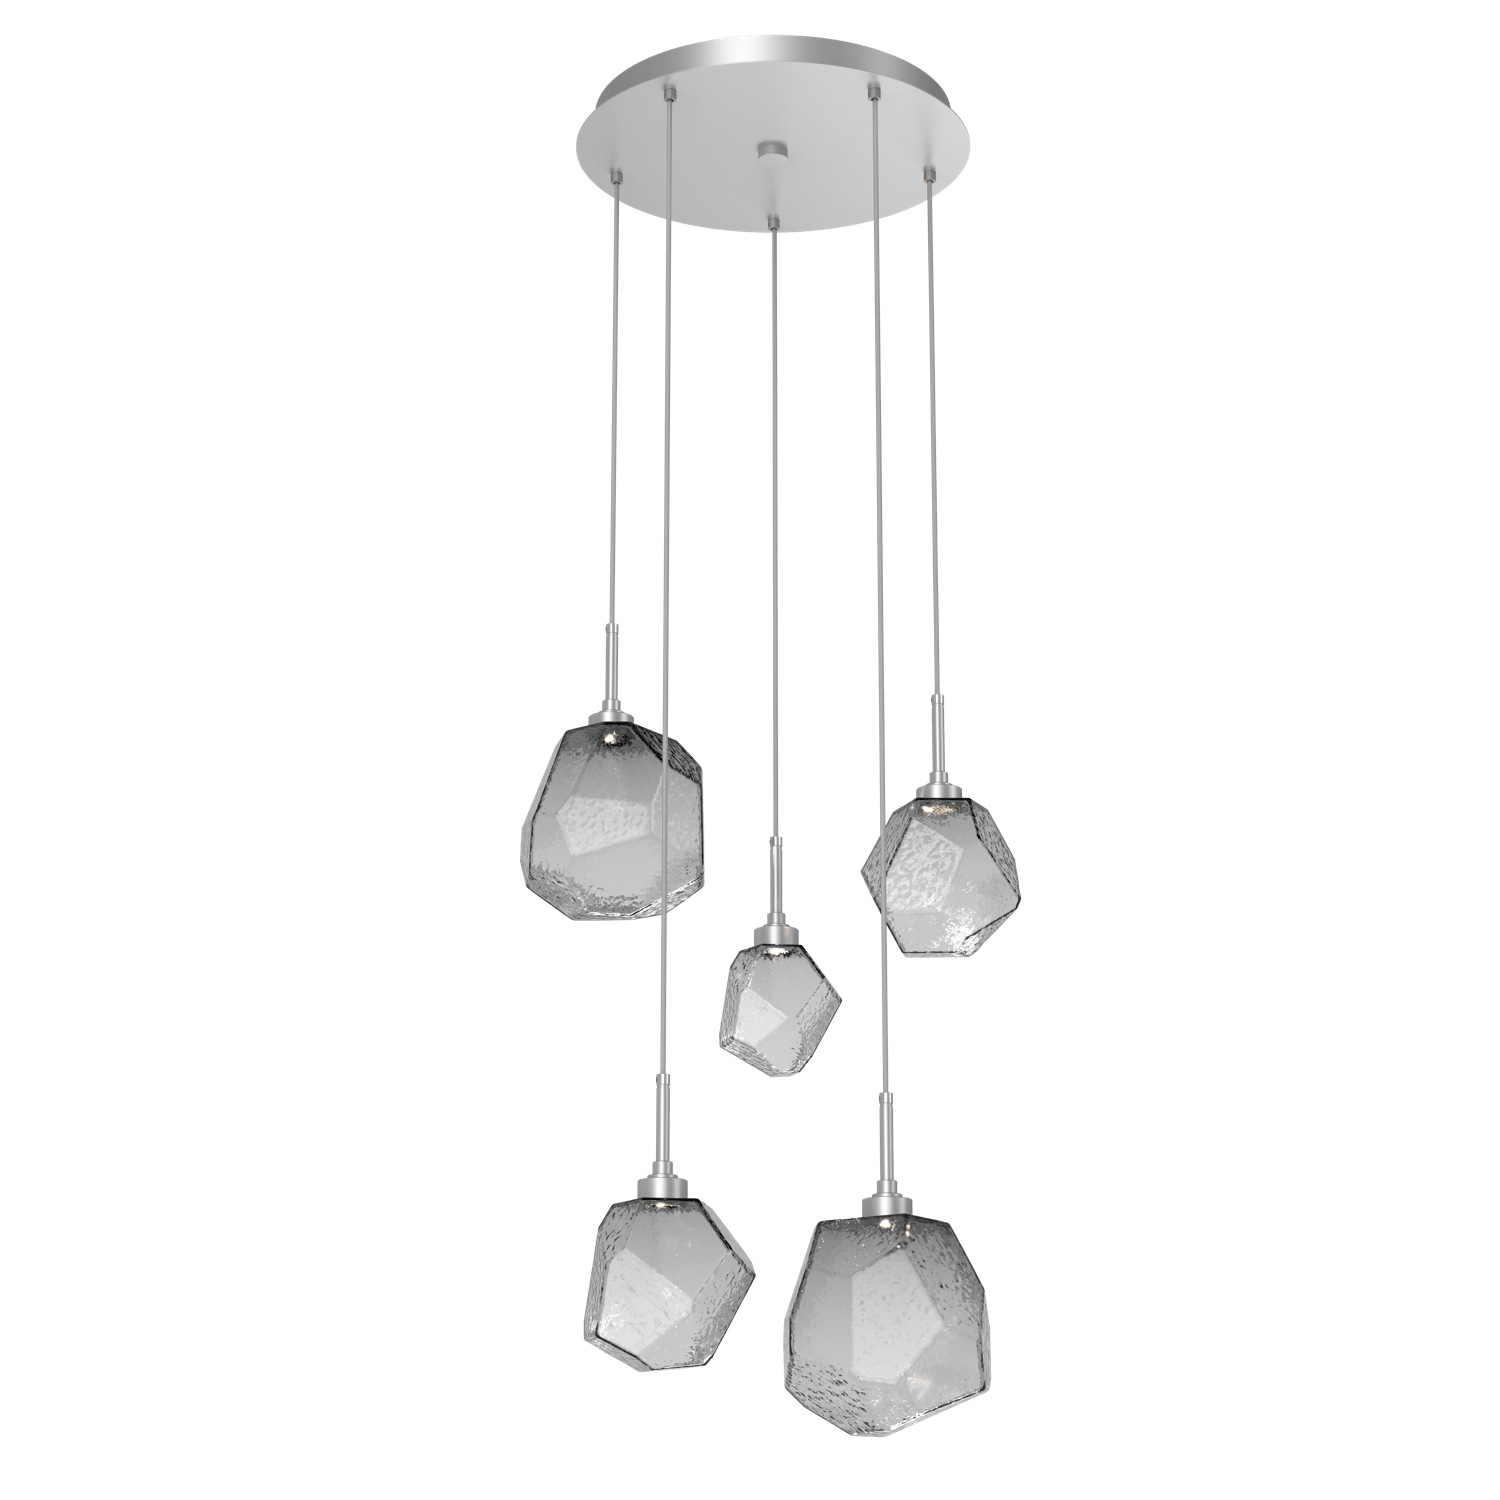 CHB0039-05-CS-S-Hammerton-Studio-Gem-5-light-round-pendant-chandelier-with-classic-silver-finish-and-smoke-blown-glass-shades-and-LED-lamping